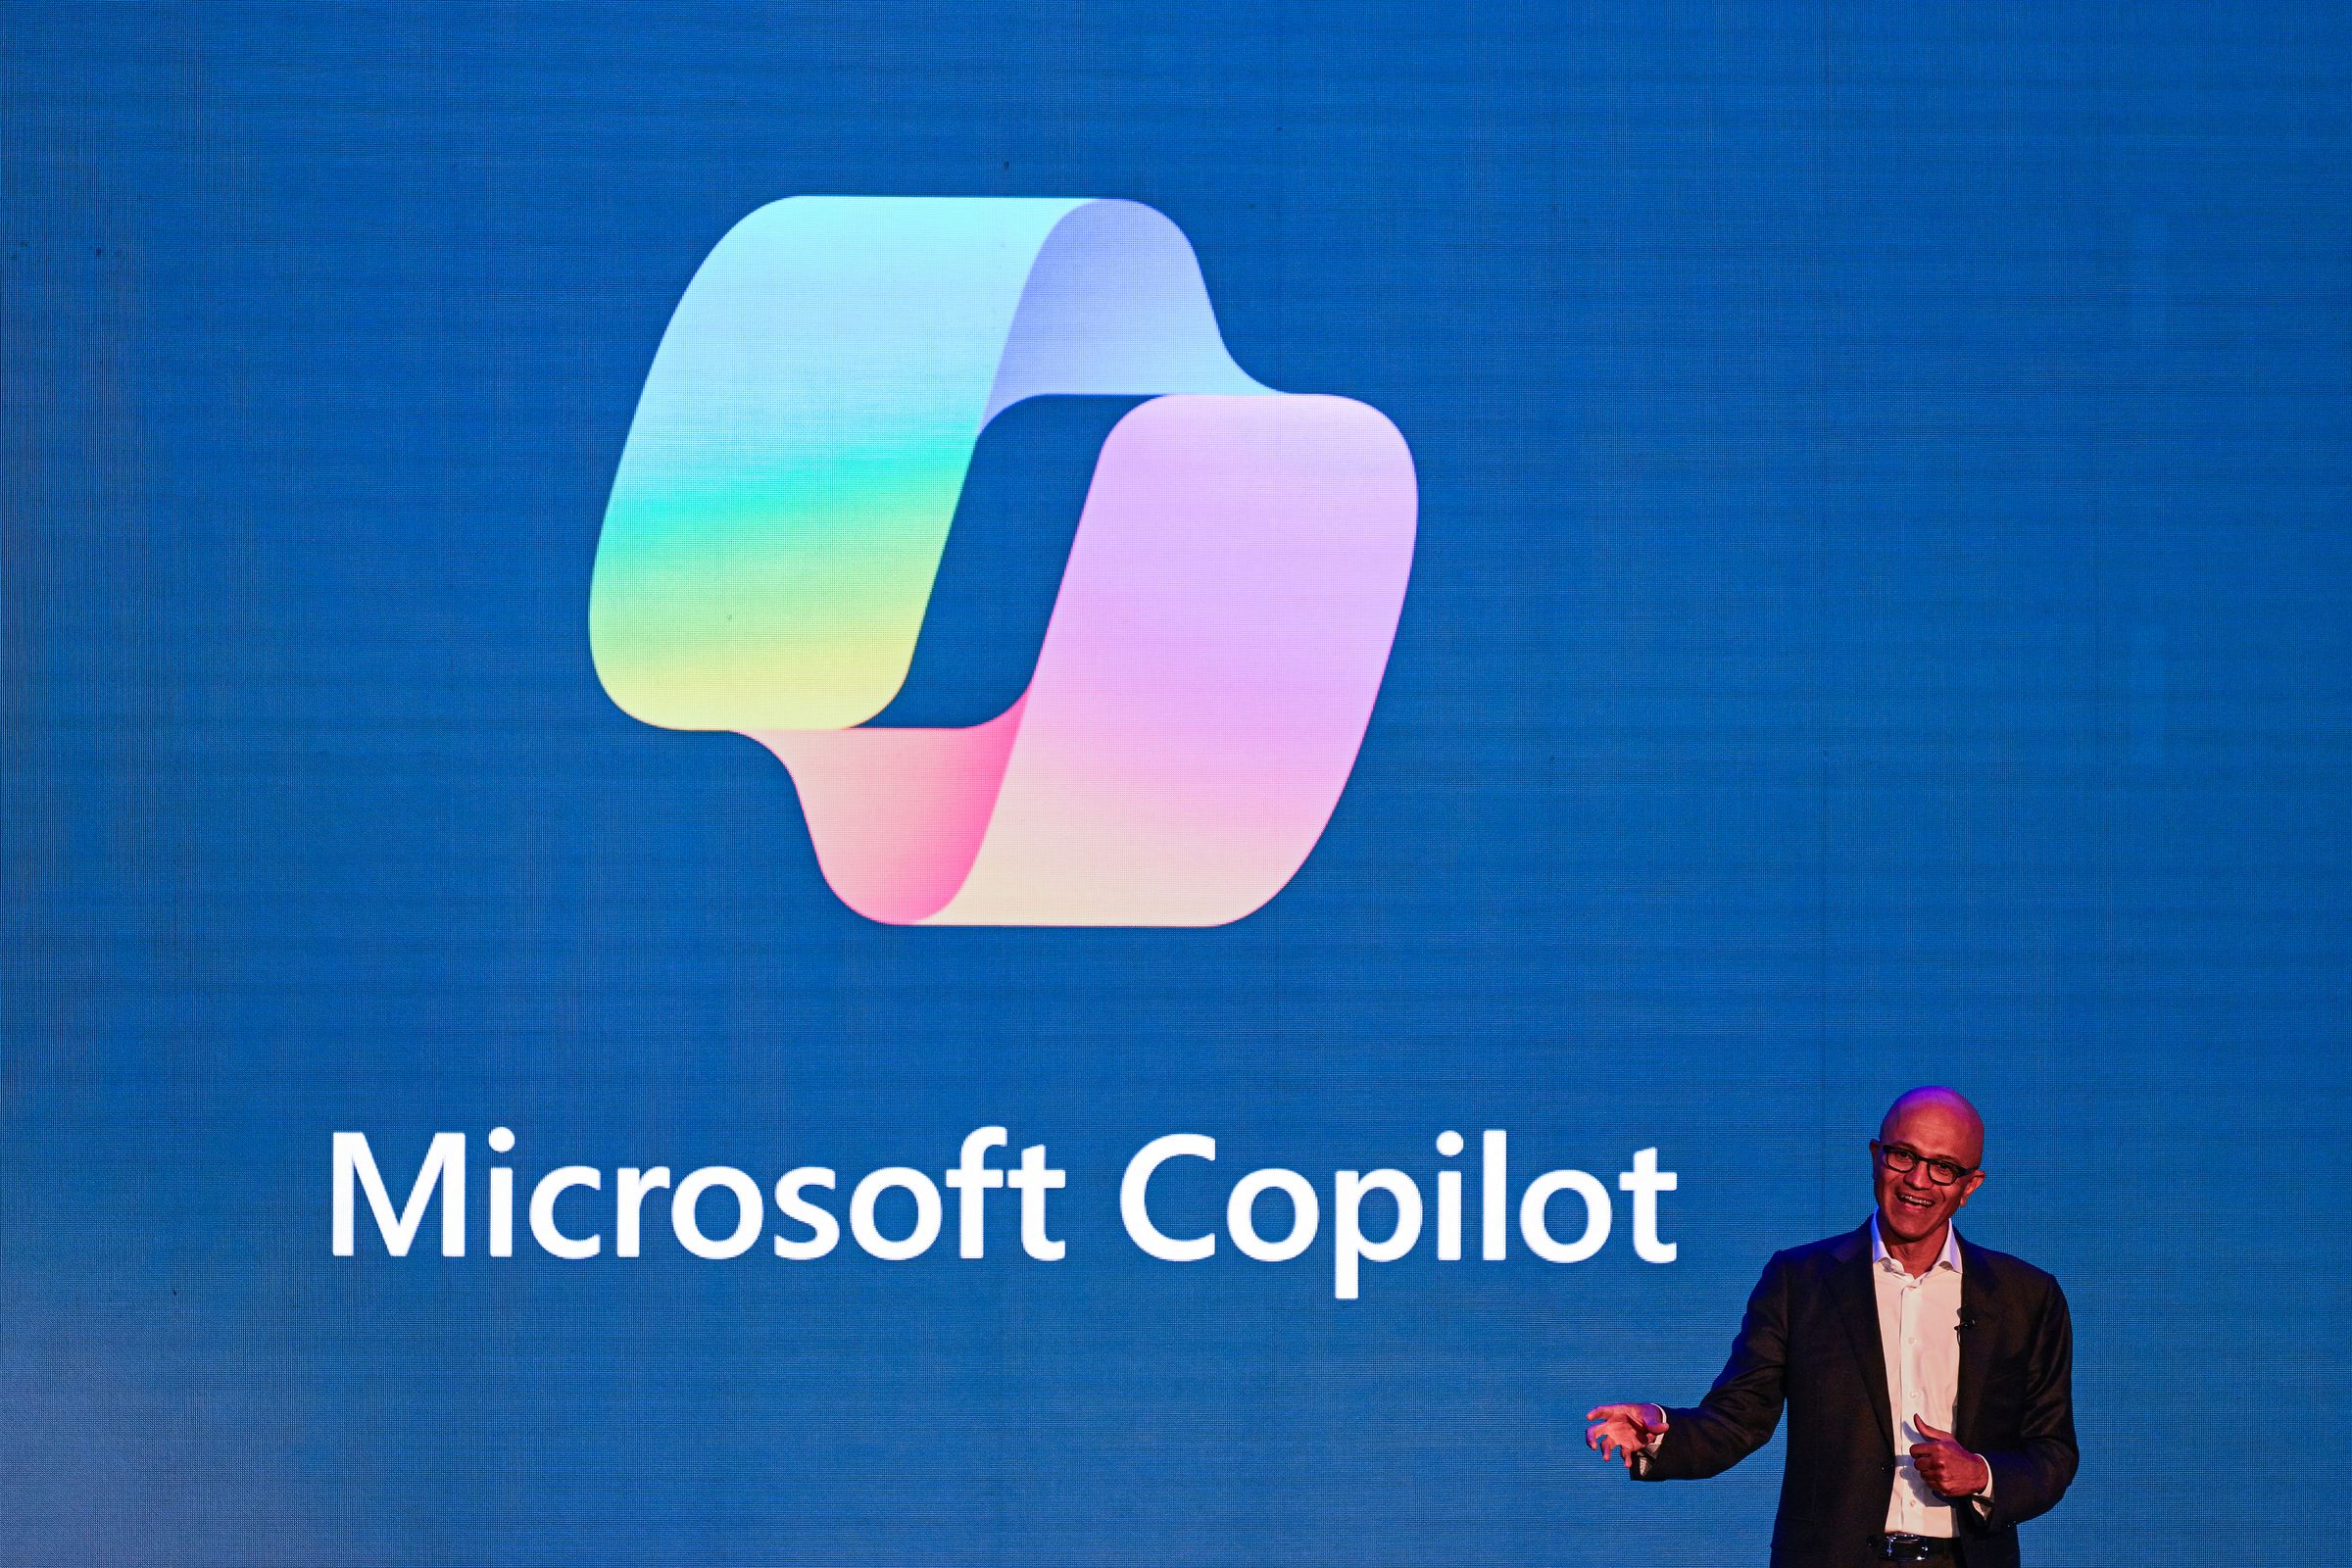 A man wearing a suit stands in front of a large screen that says “Microsoft Copilot”